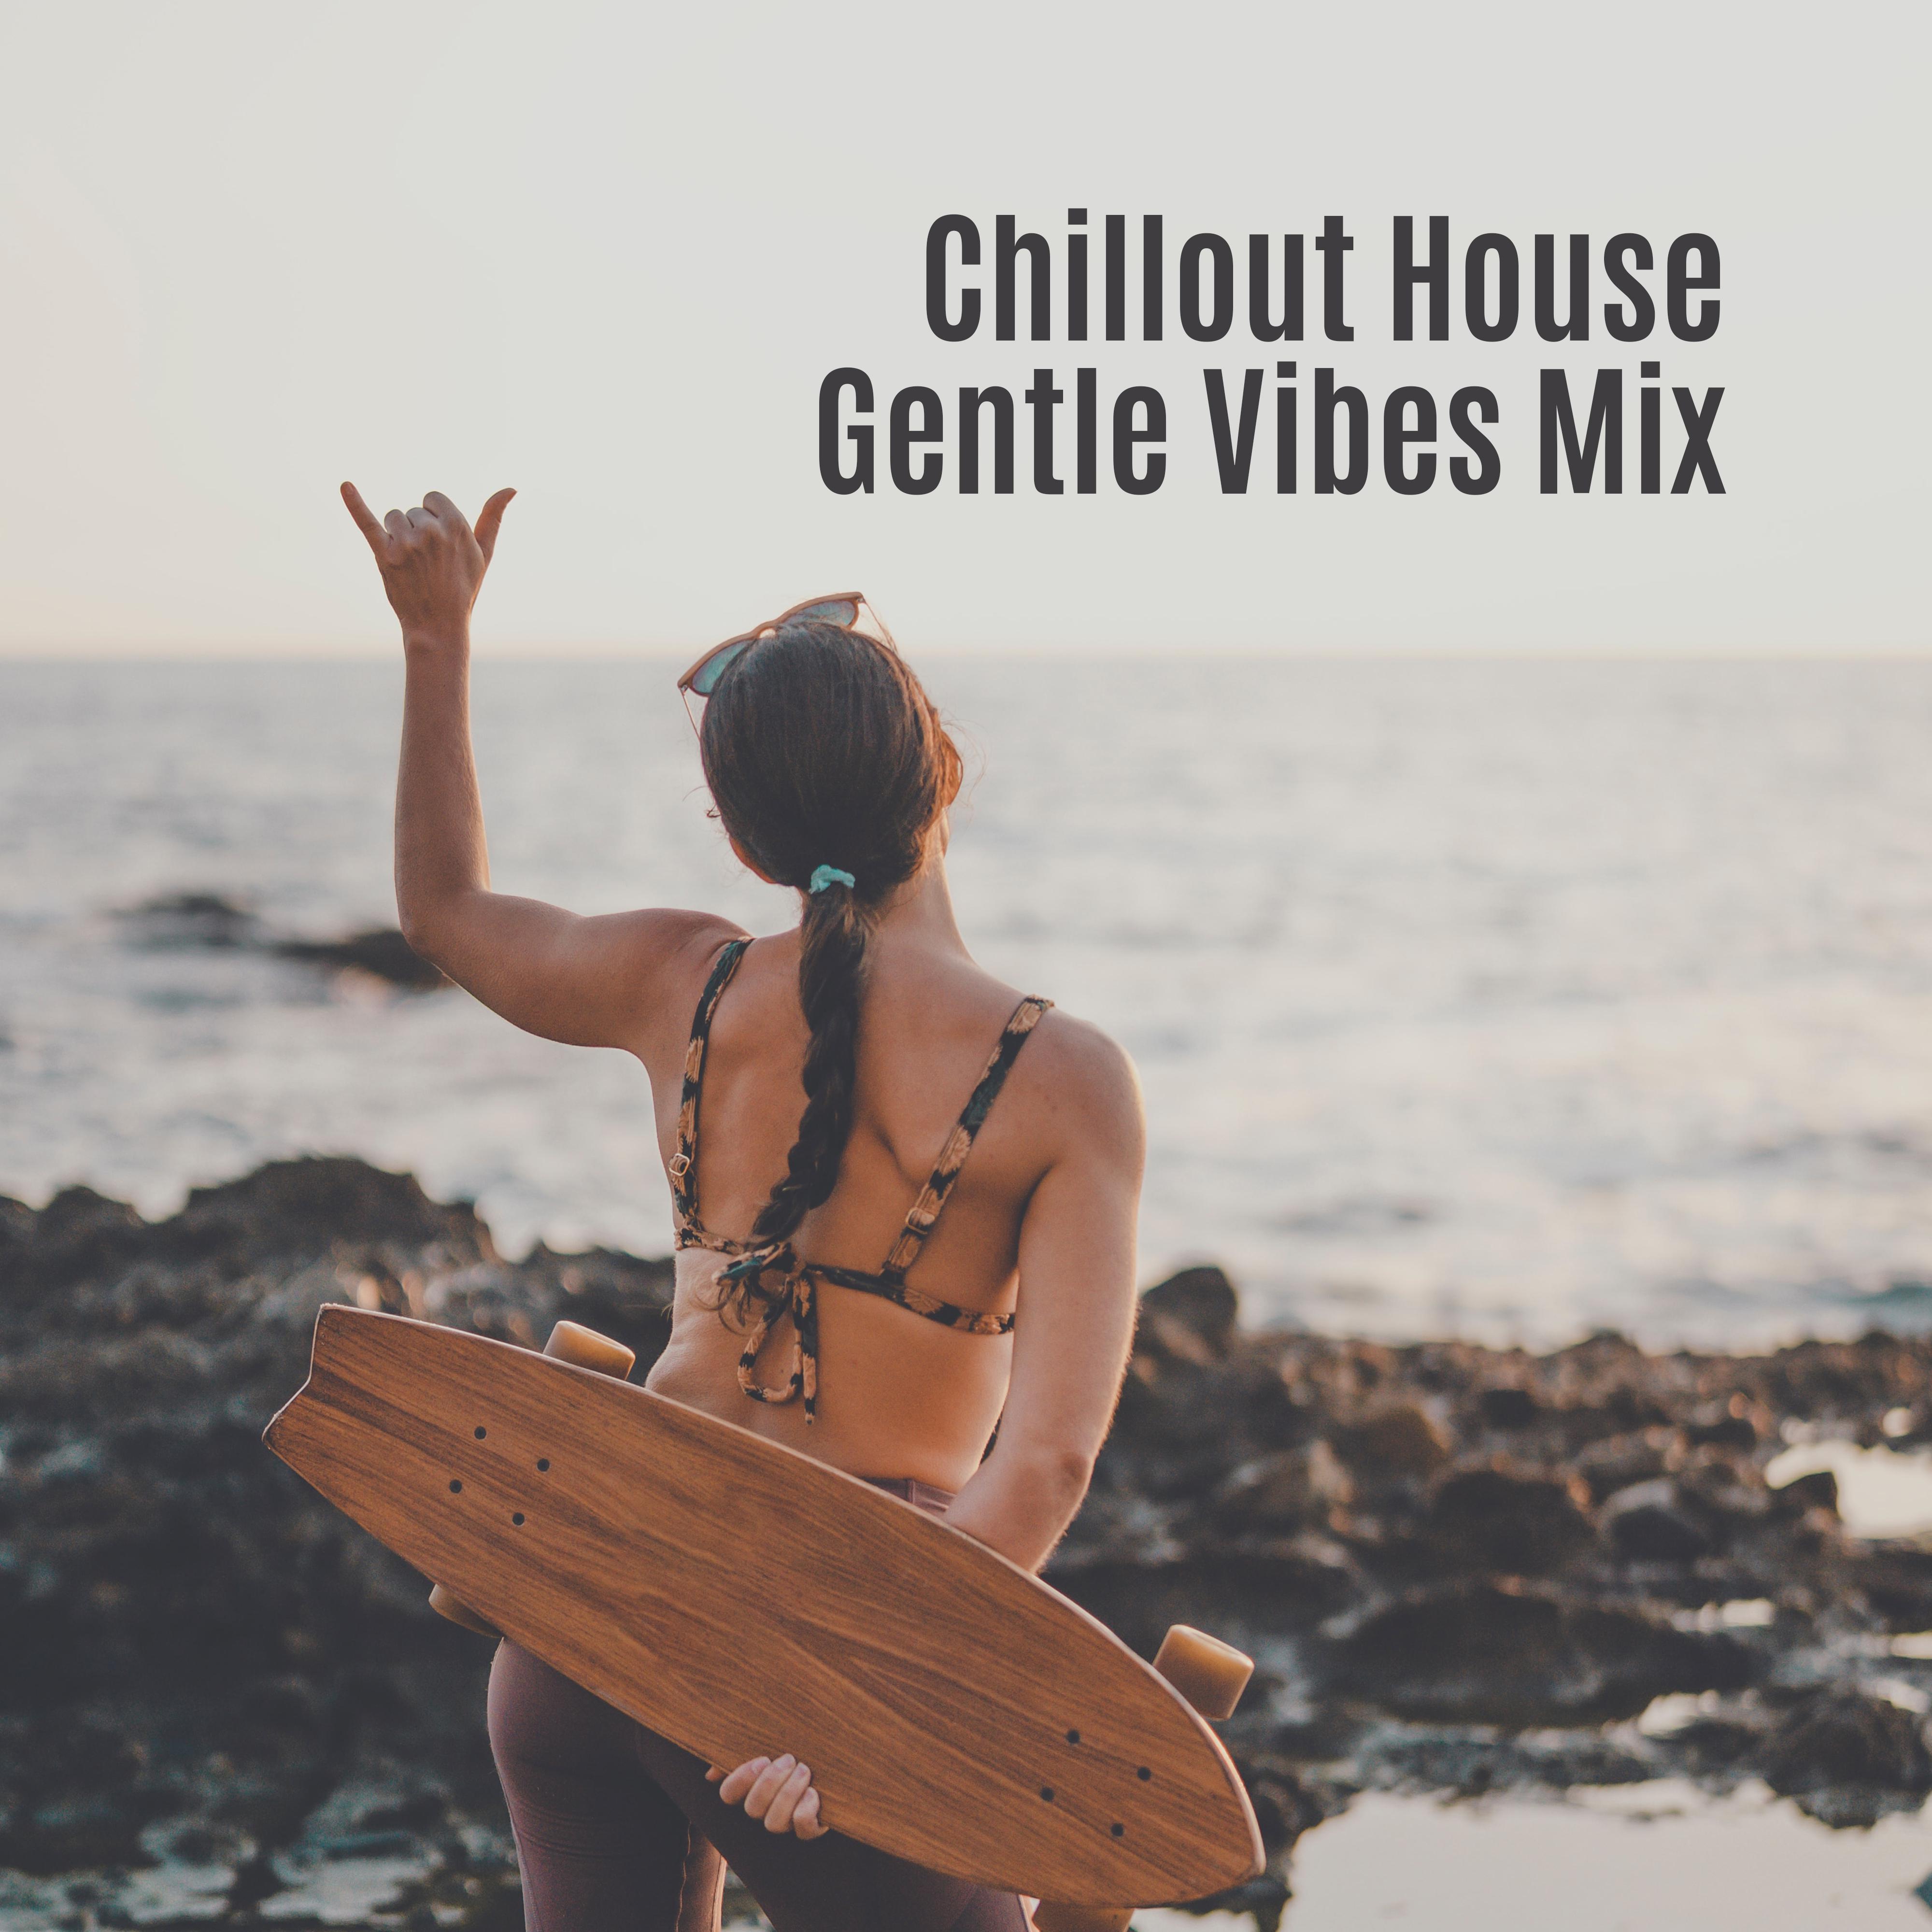 Chillout House Gentle Vibes Mix  2019 Chill Out Slow Vibes Selection, Deep Bass  Beats with Ambient Melodies, Music Perfect for Summer Holiday Relaxation on the Beach or Pool Cocktail Party